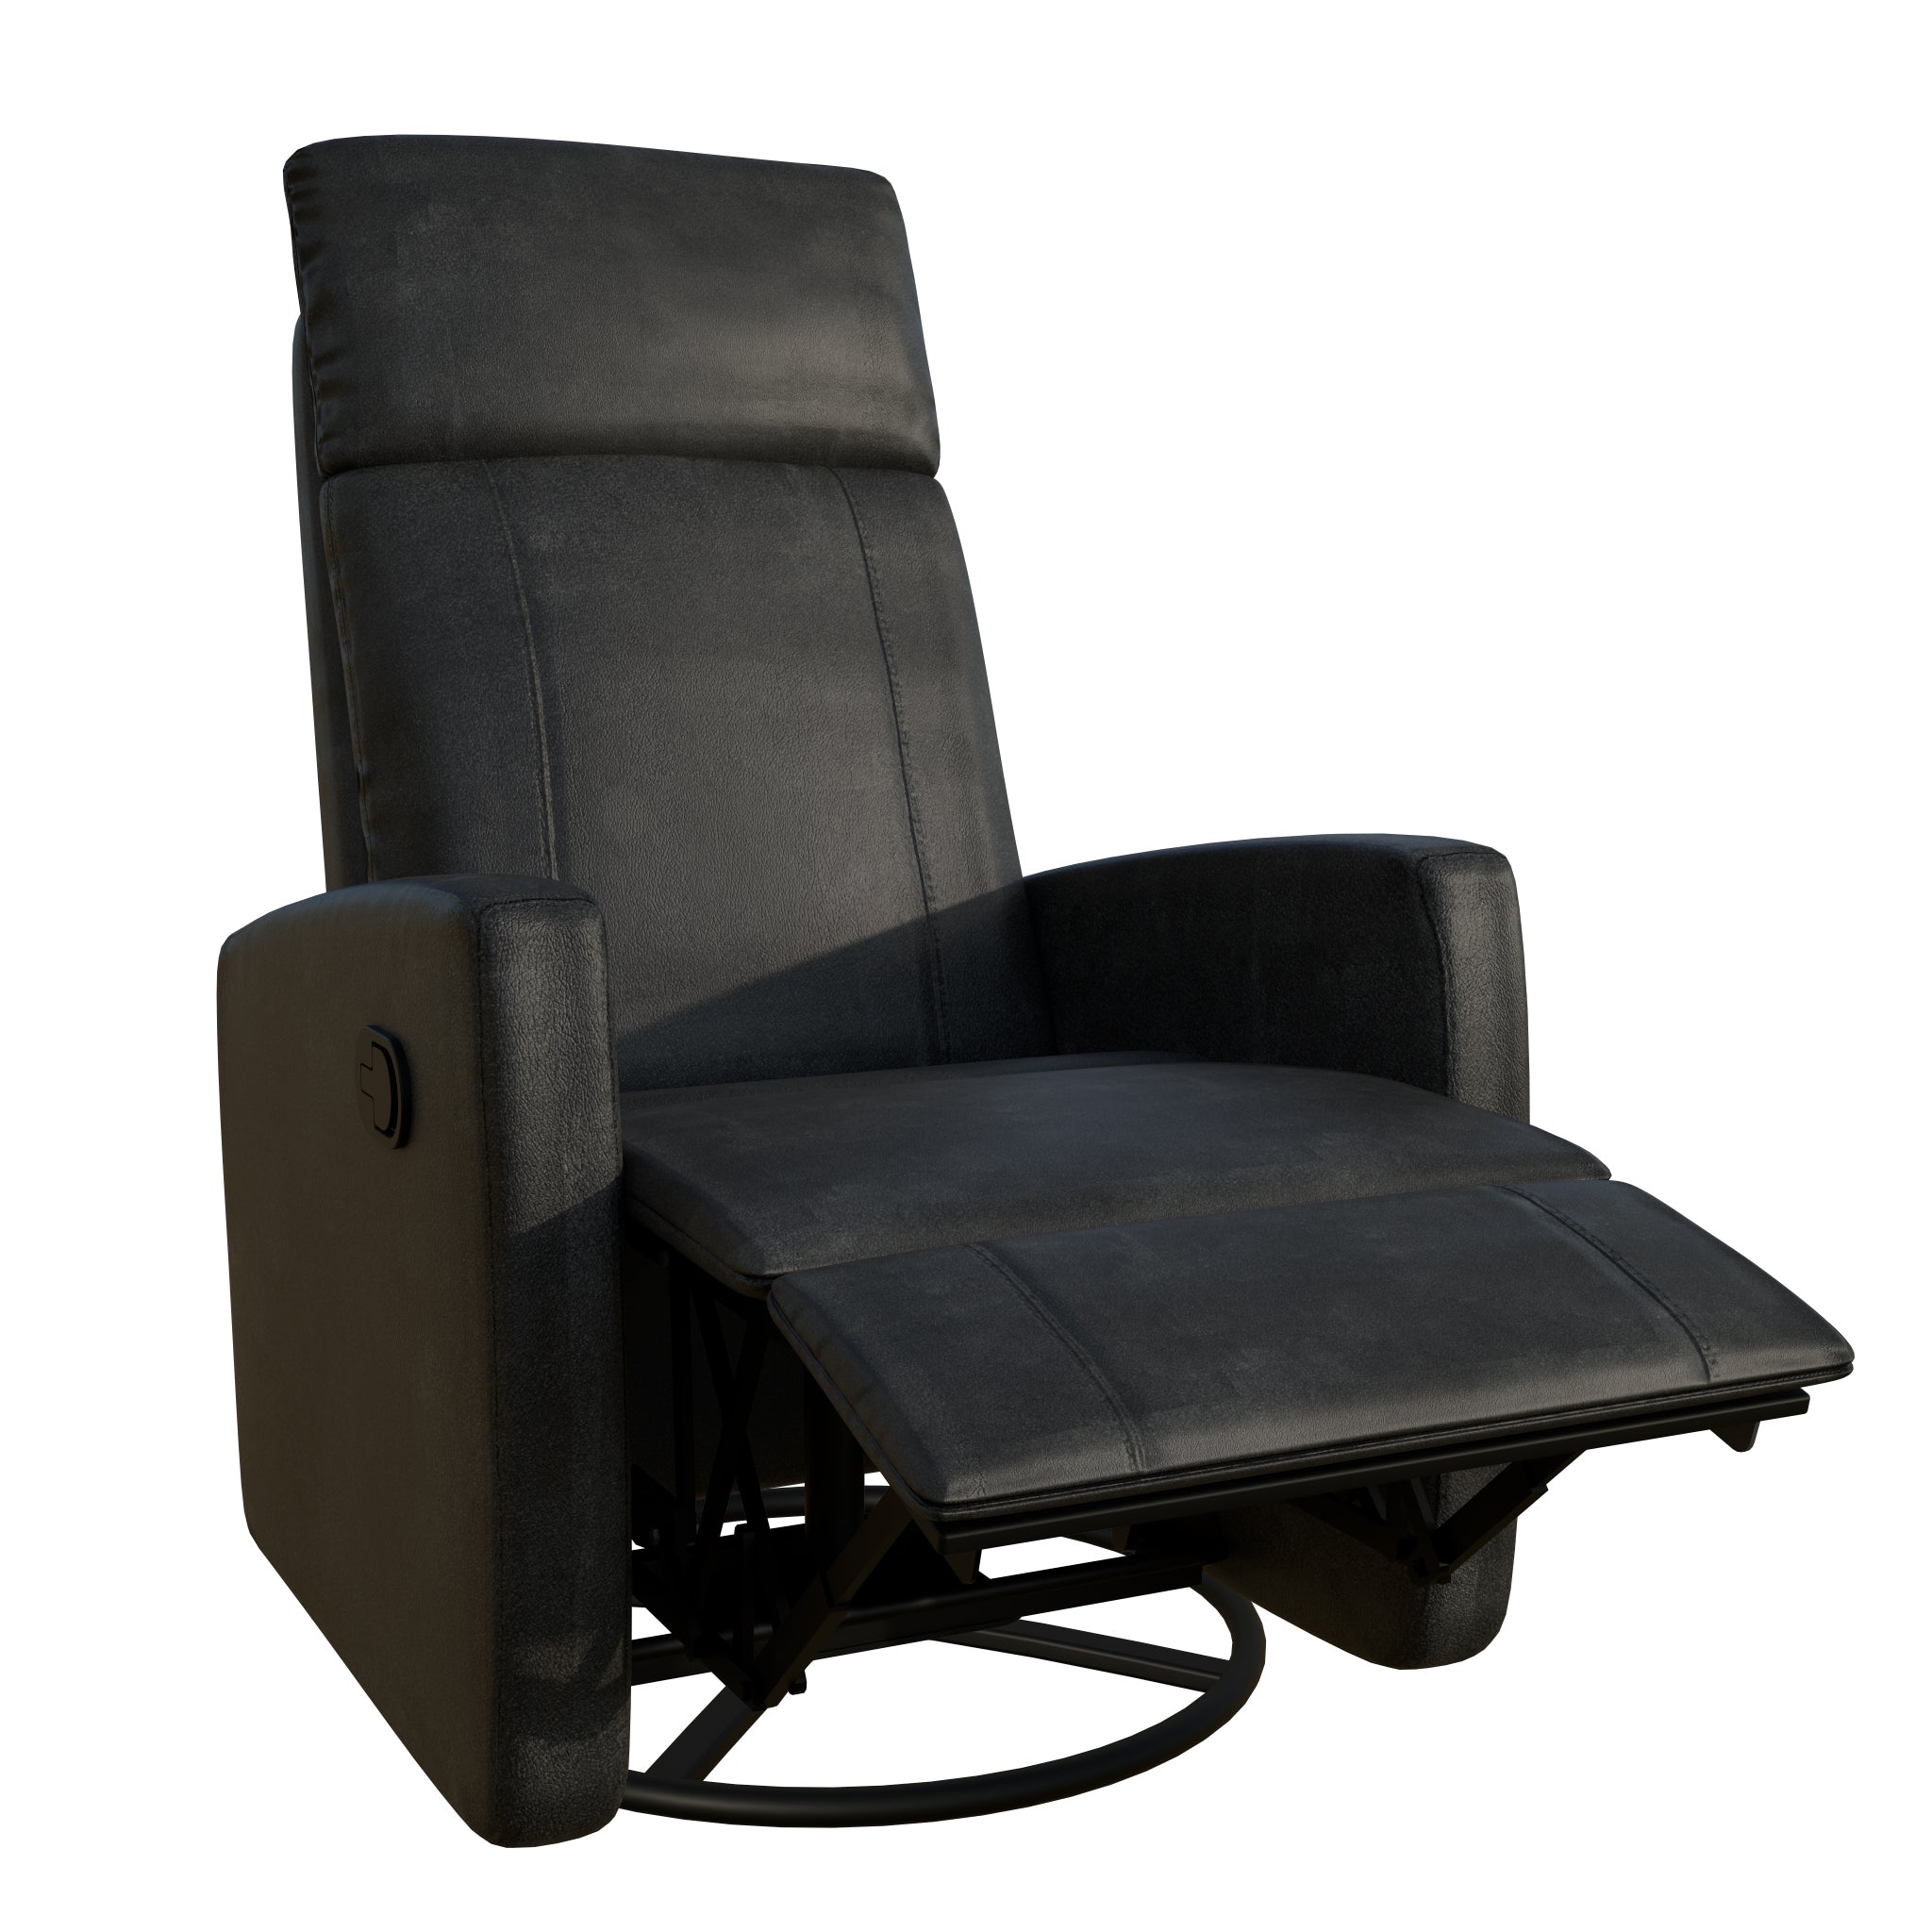 Melo Relax S+ Glider - ANB Baby -766429782339$500 - $1000